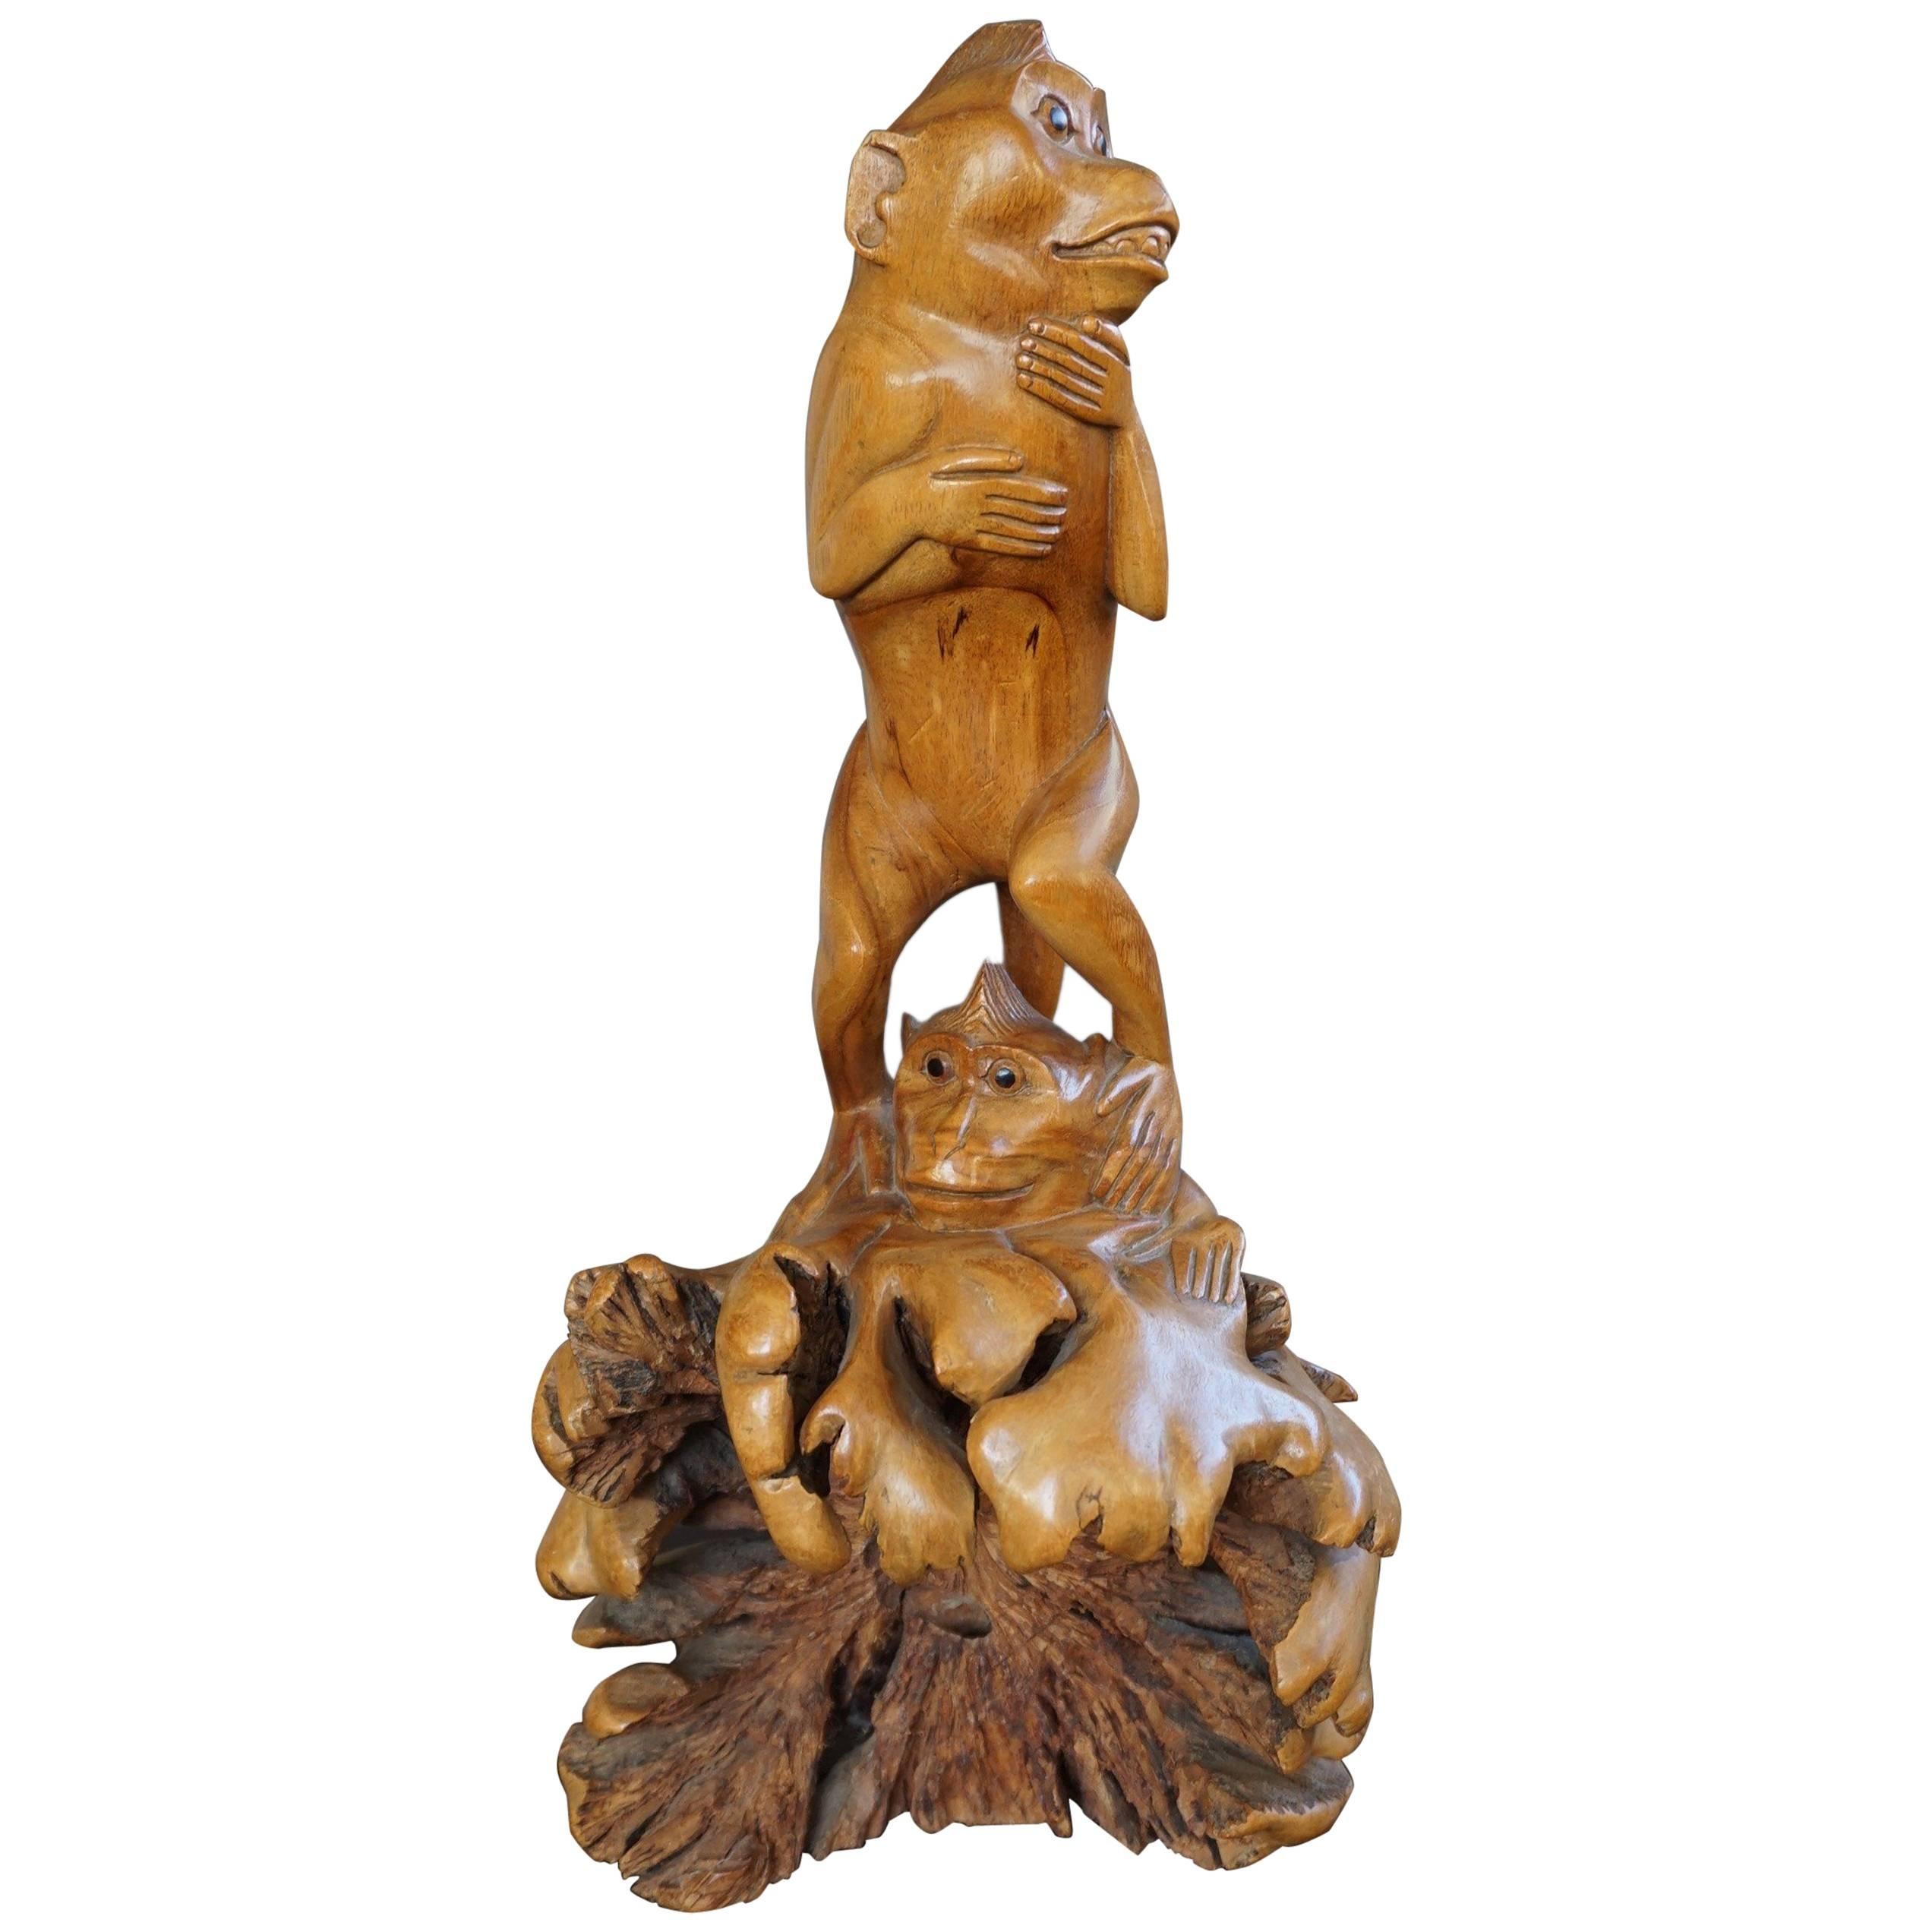 Hand-Carved Wooden Midcentury Two Monkey Sculpture Out of Tropical Tree Trunk For Sale